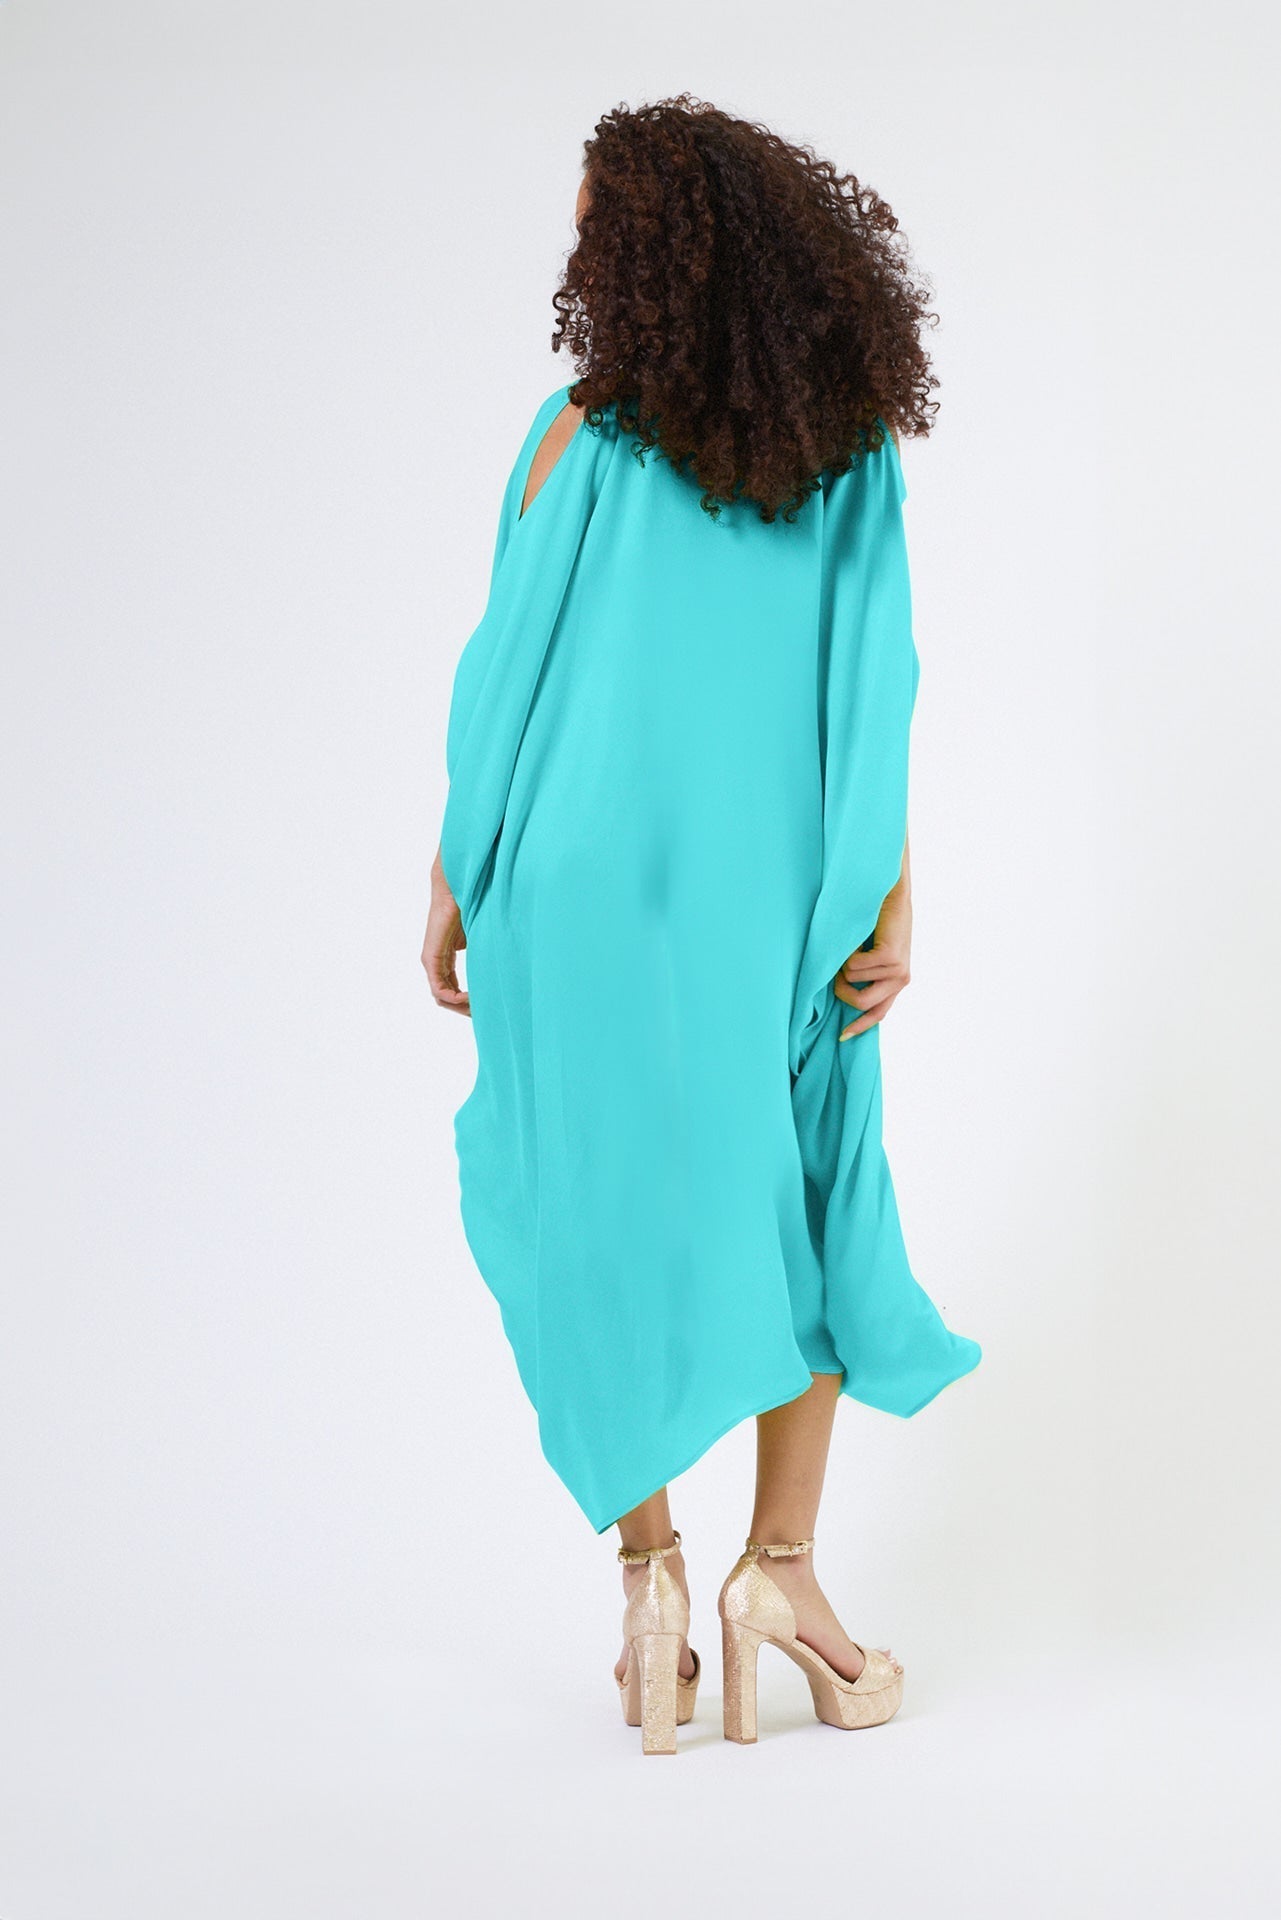 back view of woman wearing bright turquoise kaftan duster with front zipper made from recycled materials